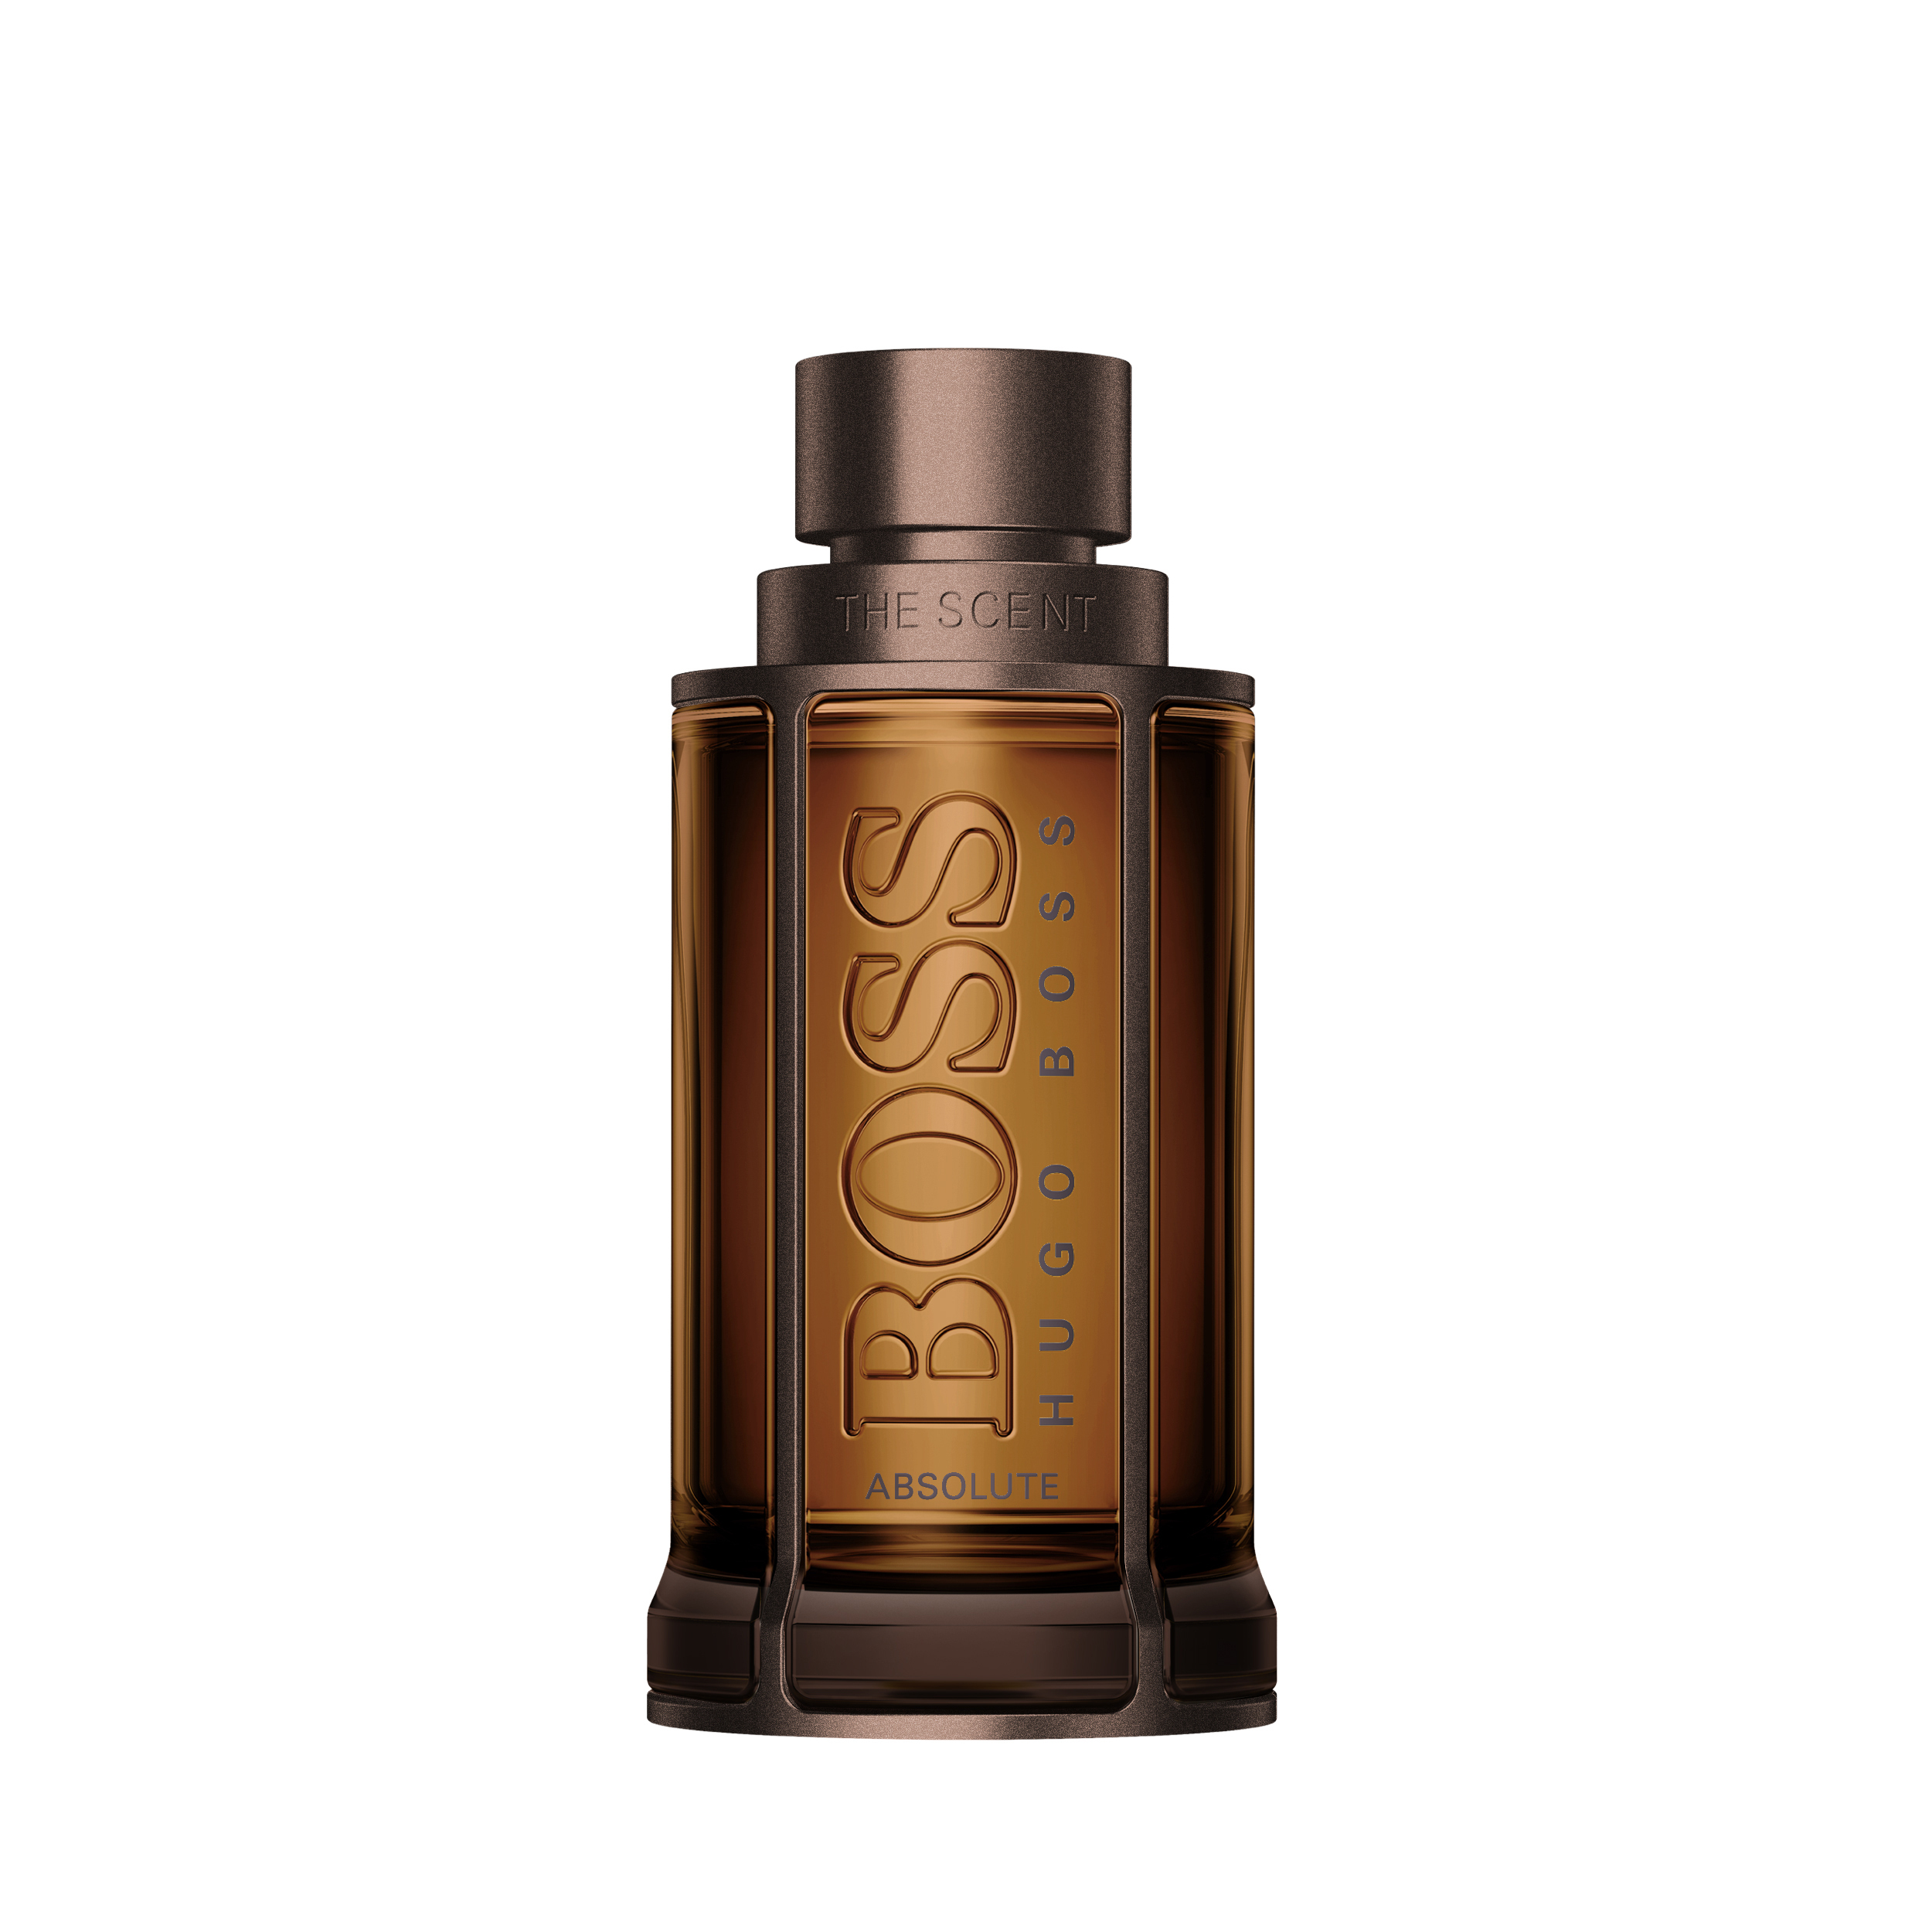 HUGO BOSS The Scent Absolute For Him